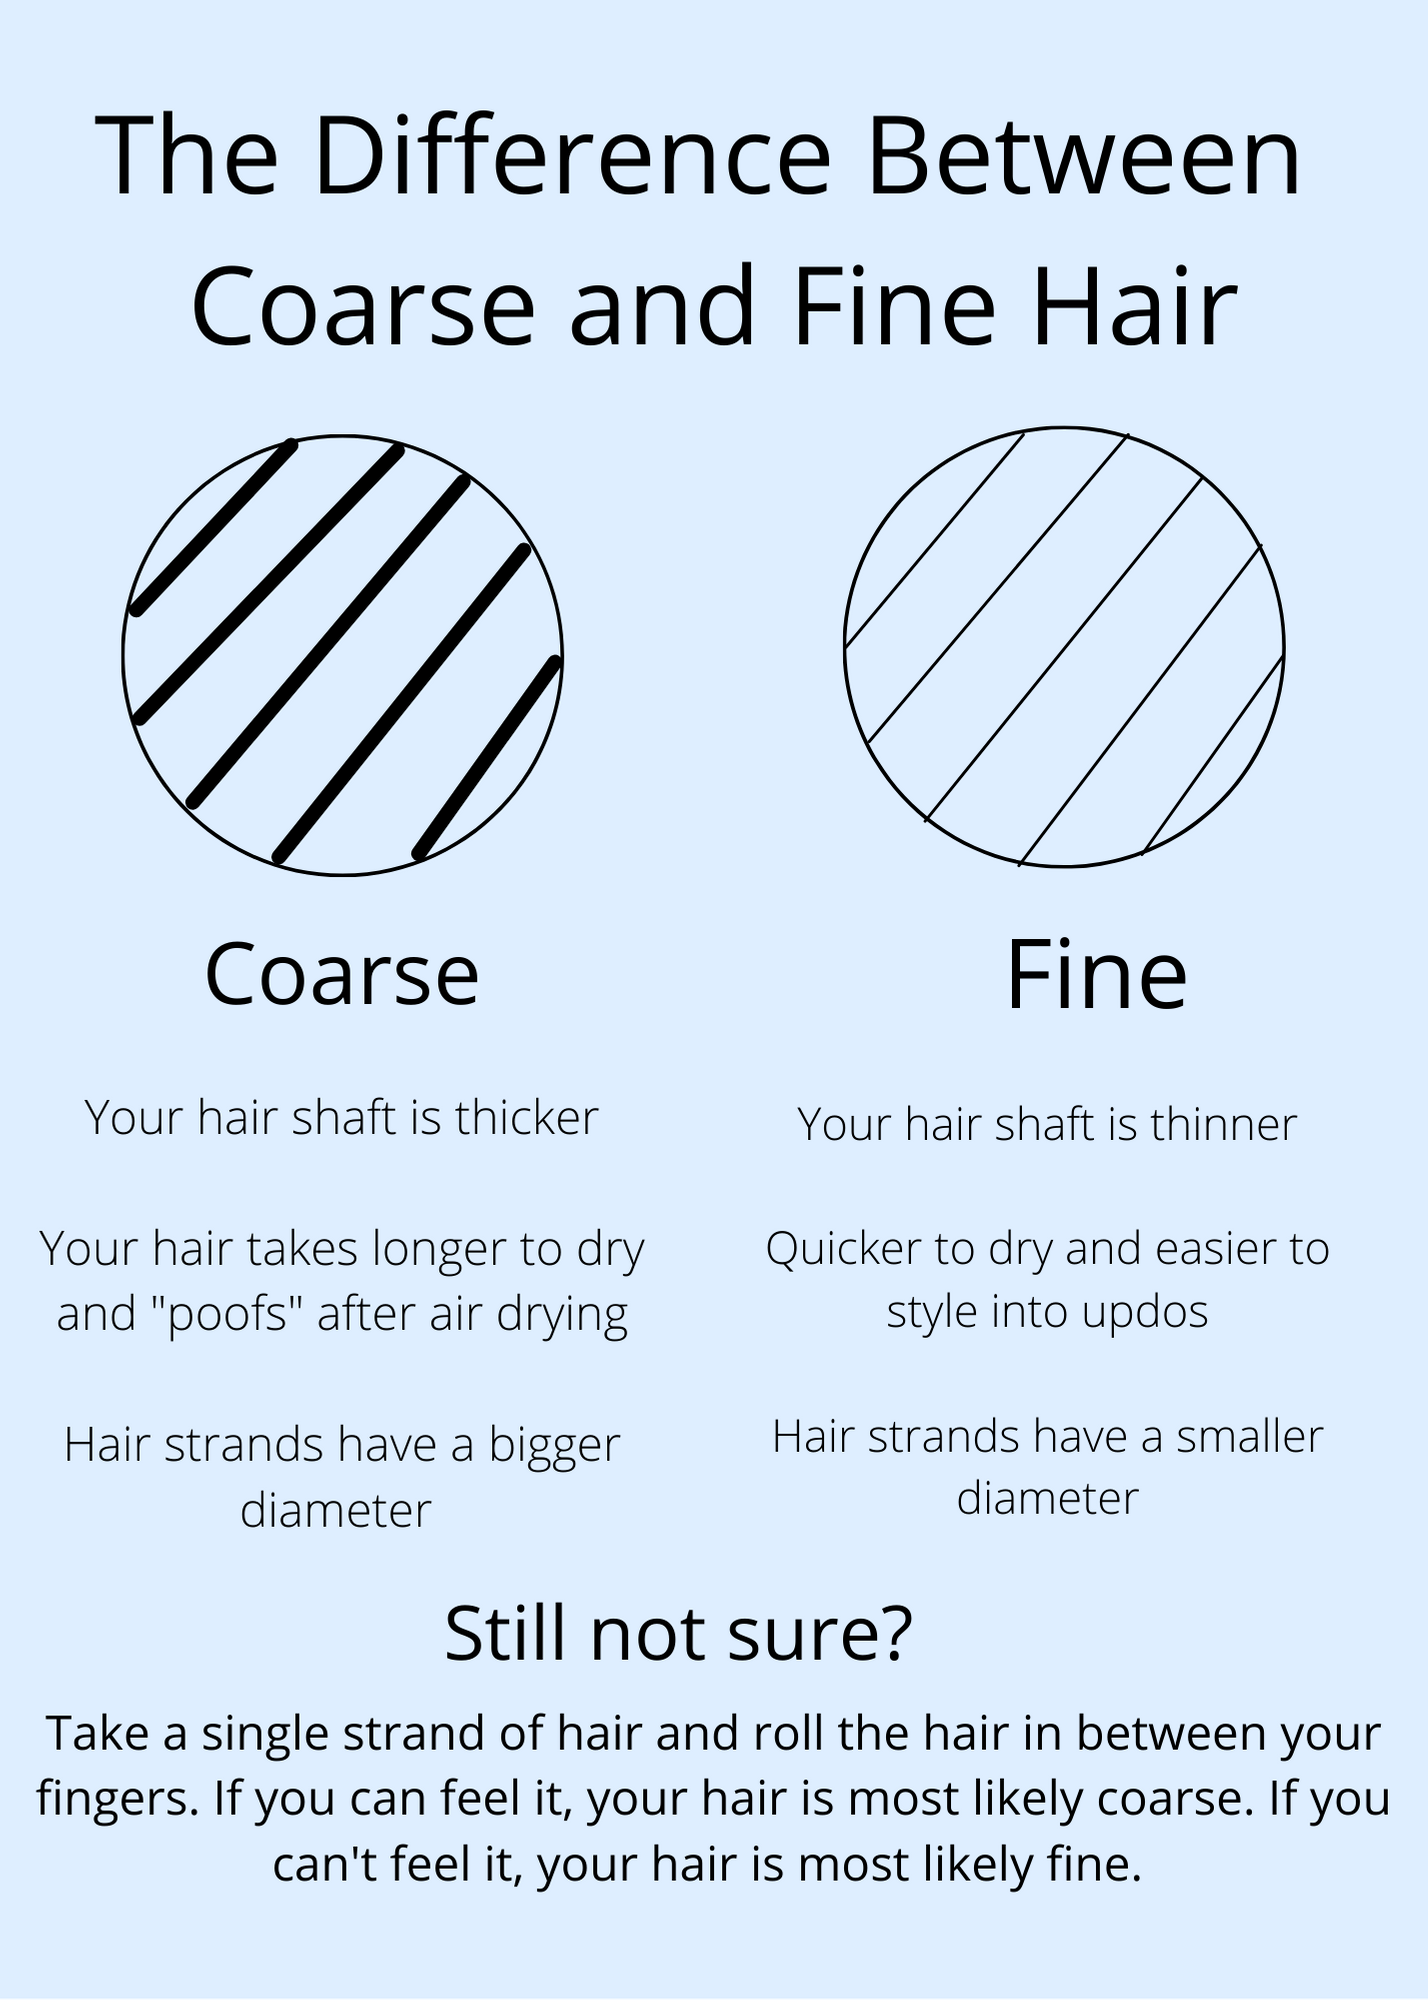 Is my hair Fine or Coarse?